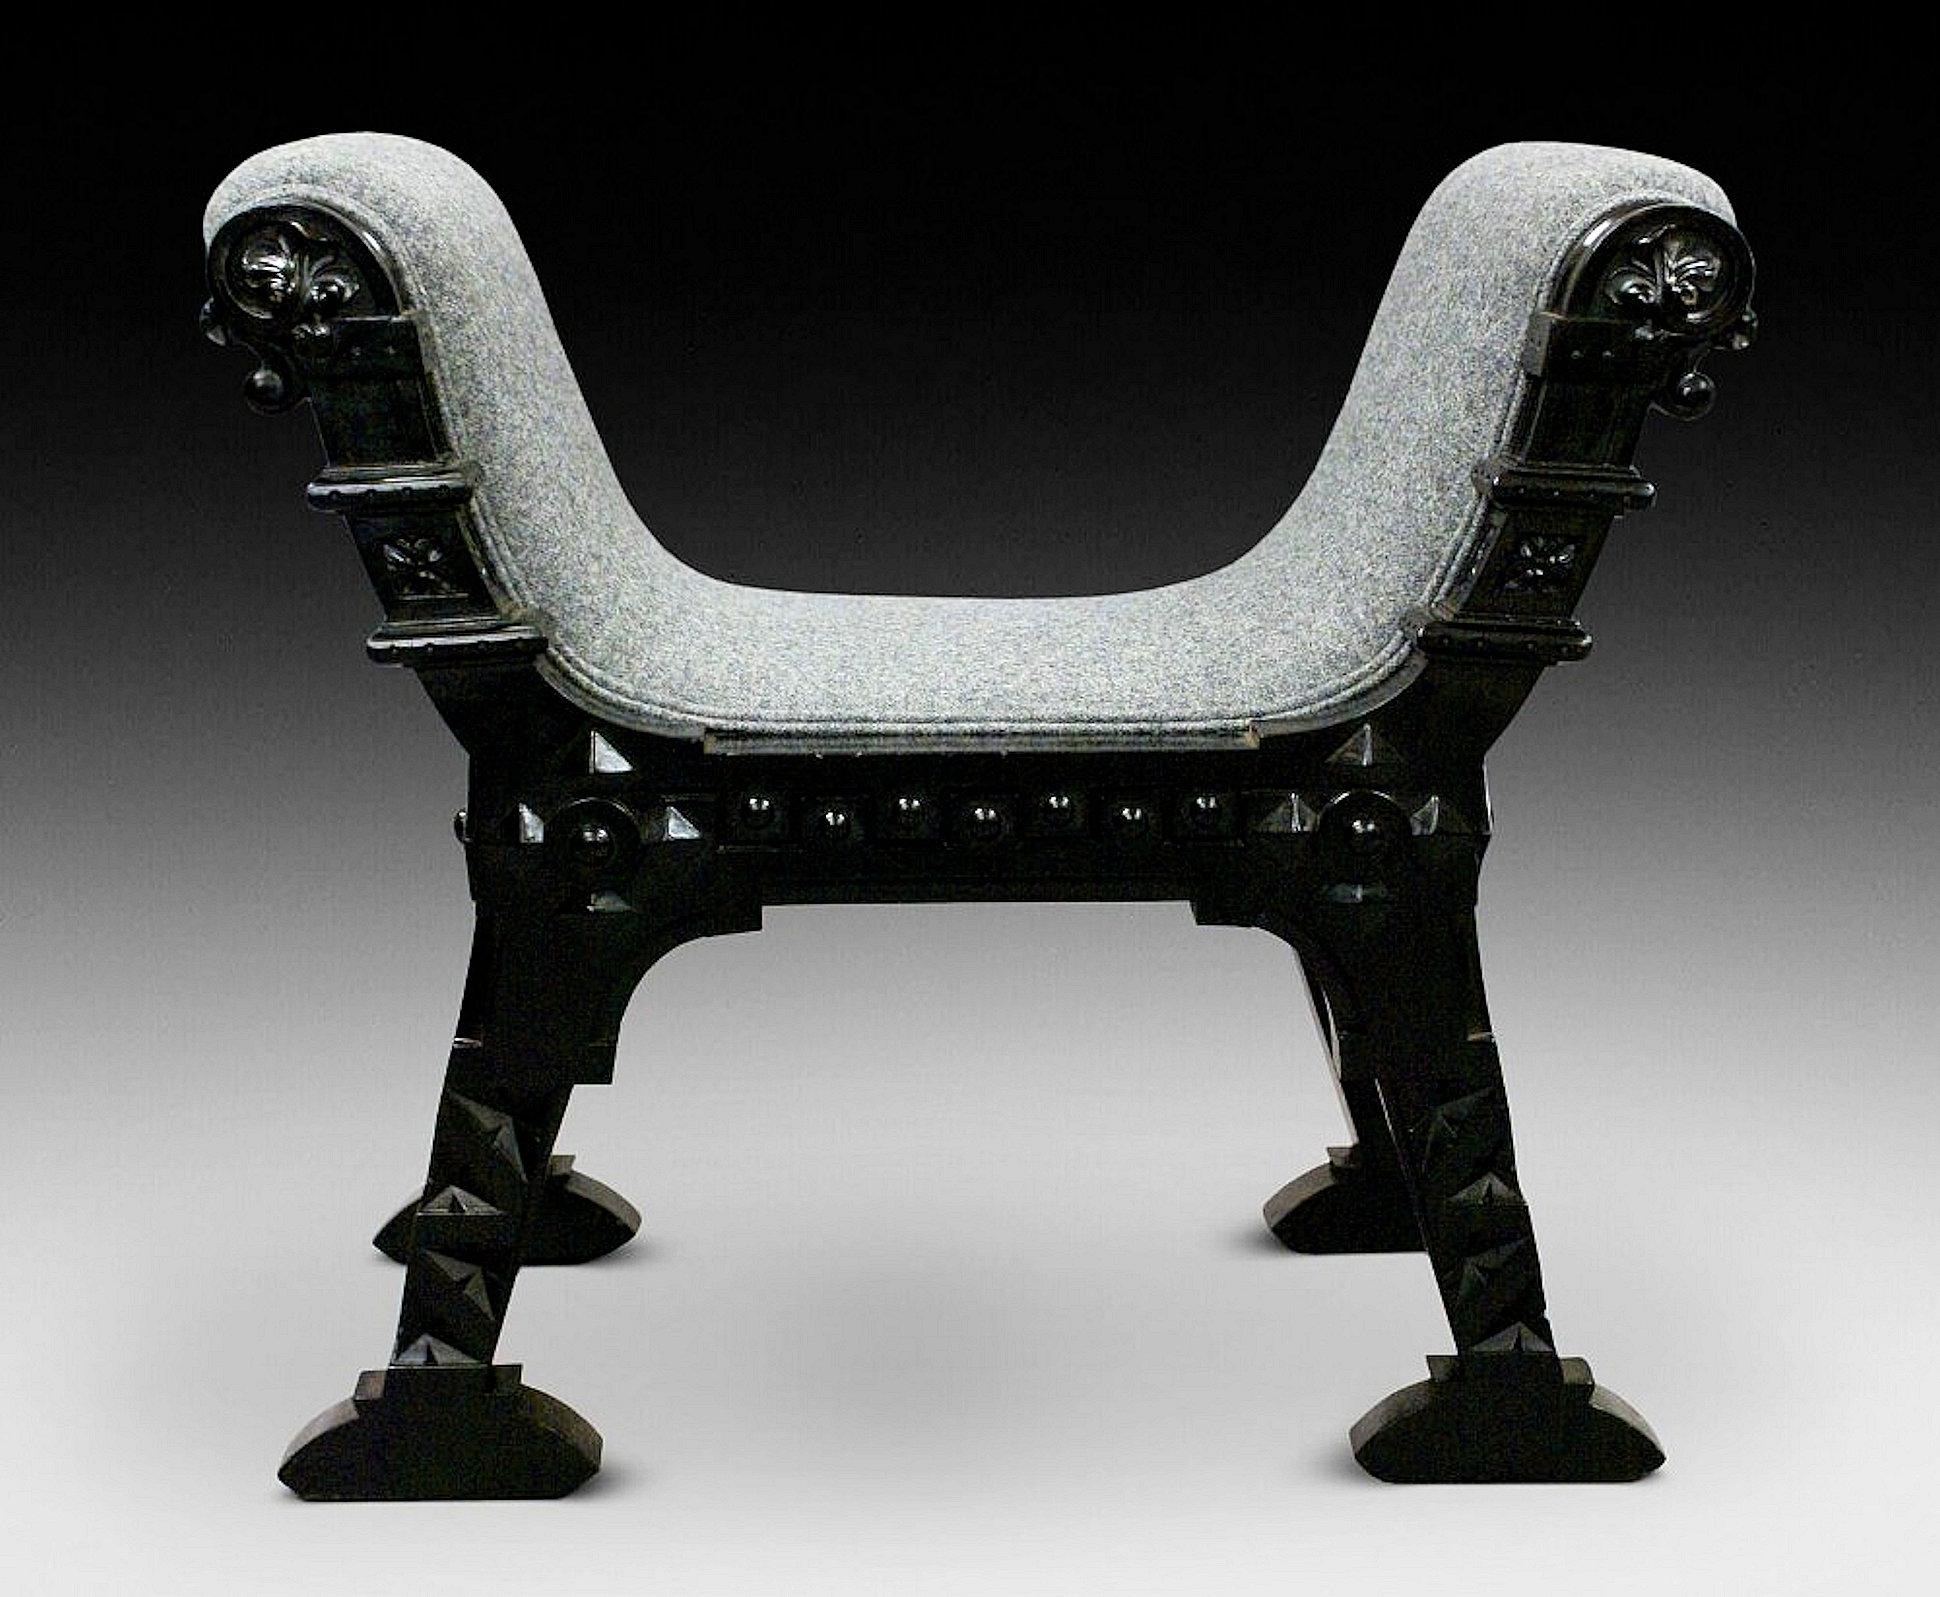 This beautiful pair of 19th C. Ebonised hardwood window seats follow the Aesthetic movement in style and design. They showcase a strong and bold design style, and have been recently reupholstered in a soft grey wool fabric. Each seat measures 31 1/2